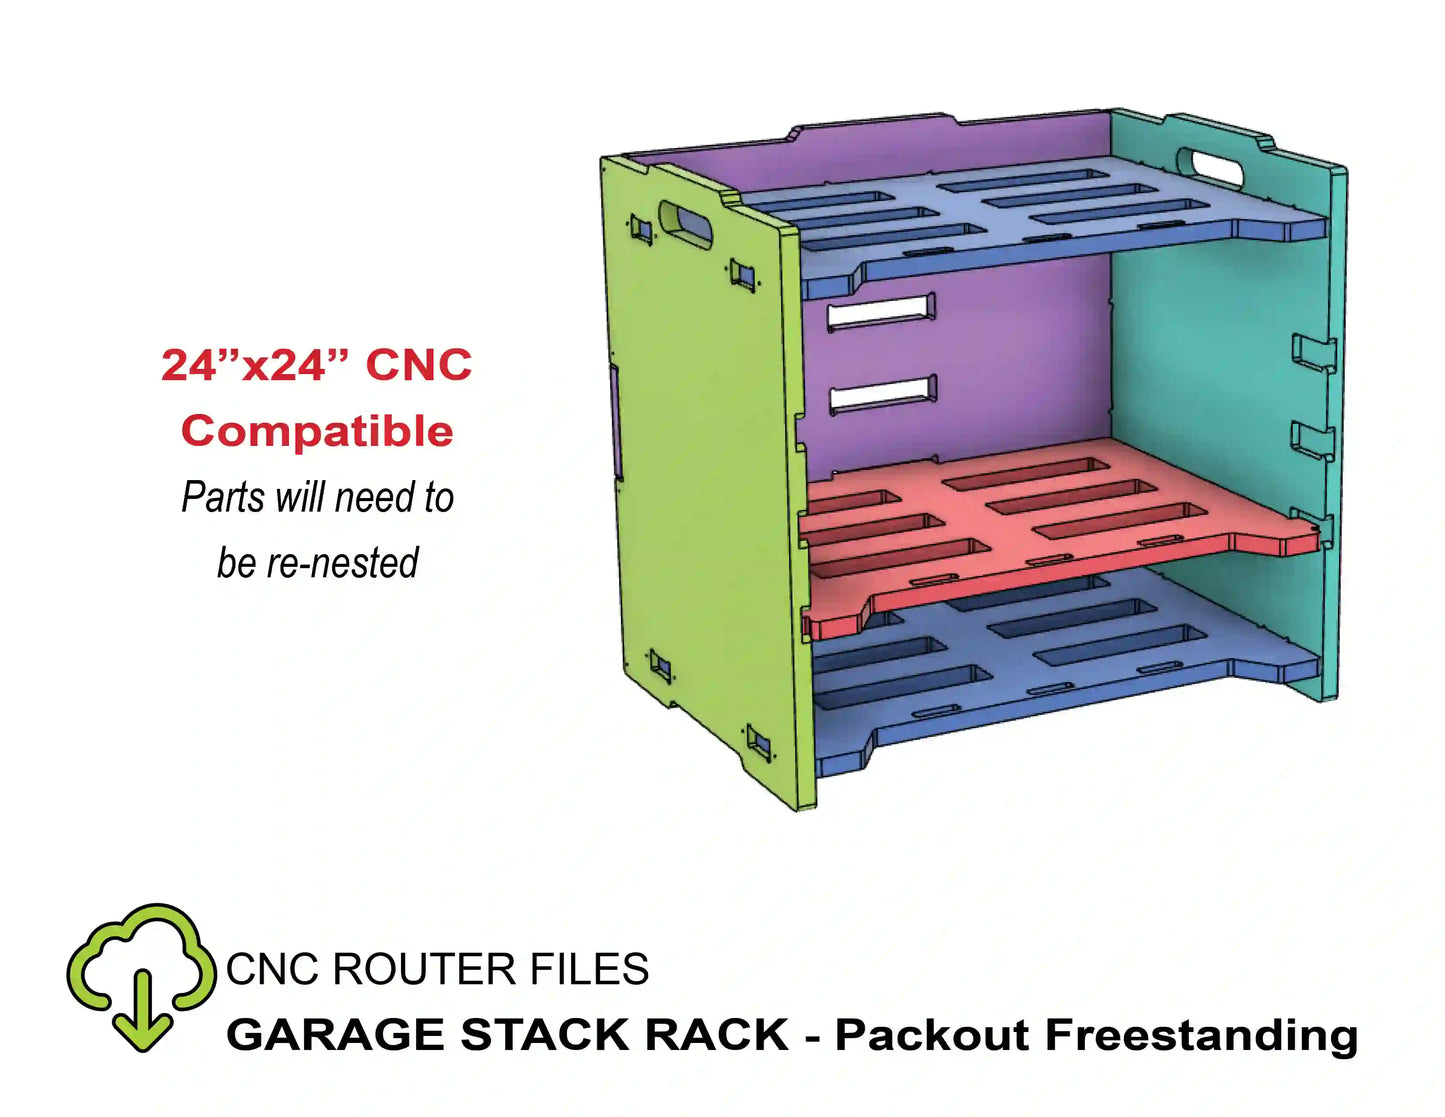 CNC Router Files Freestanding Garage Stack Rack for Packout Tool Boxes